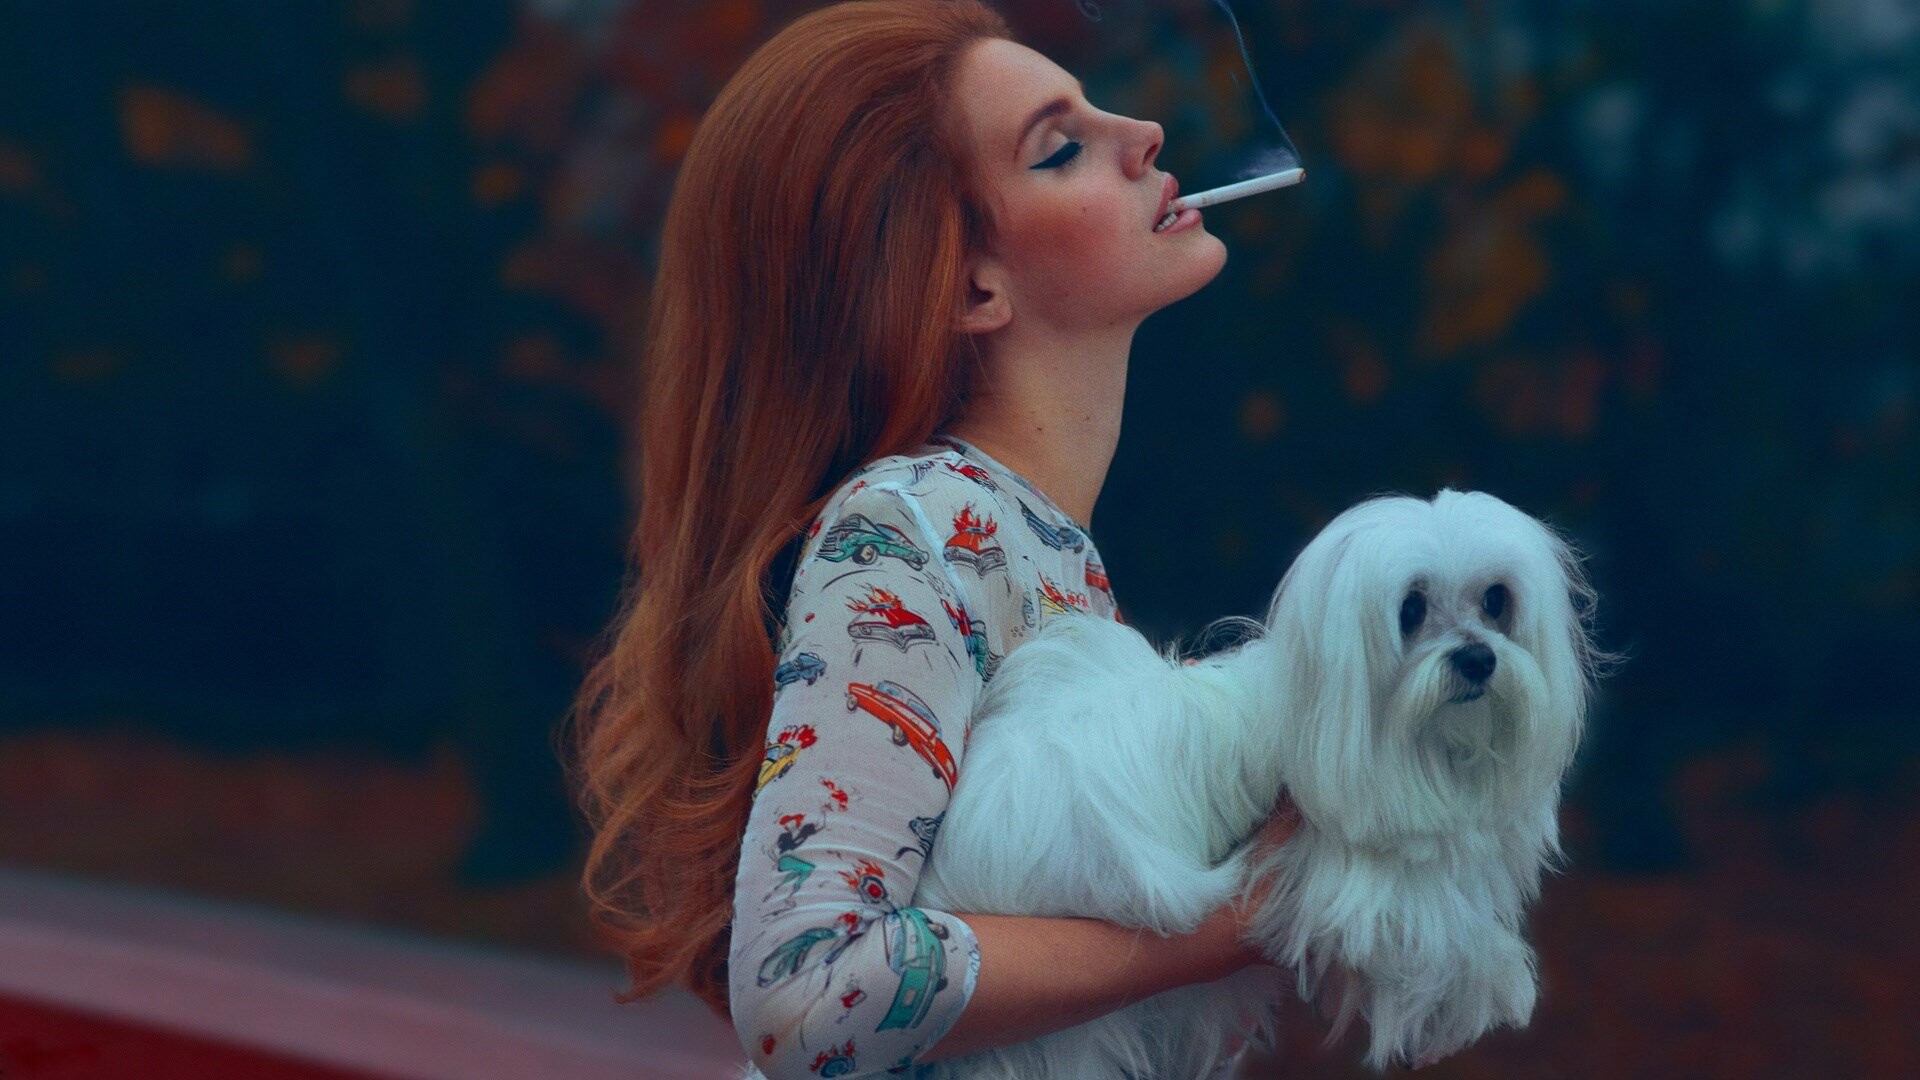 Lana Del Rey: Elizabeth Woolridge Grant, A beautiful and gifted songwriter and singer. 1920x1080 Full HD Wallpaper.